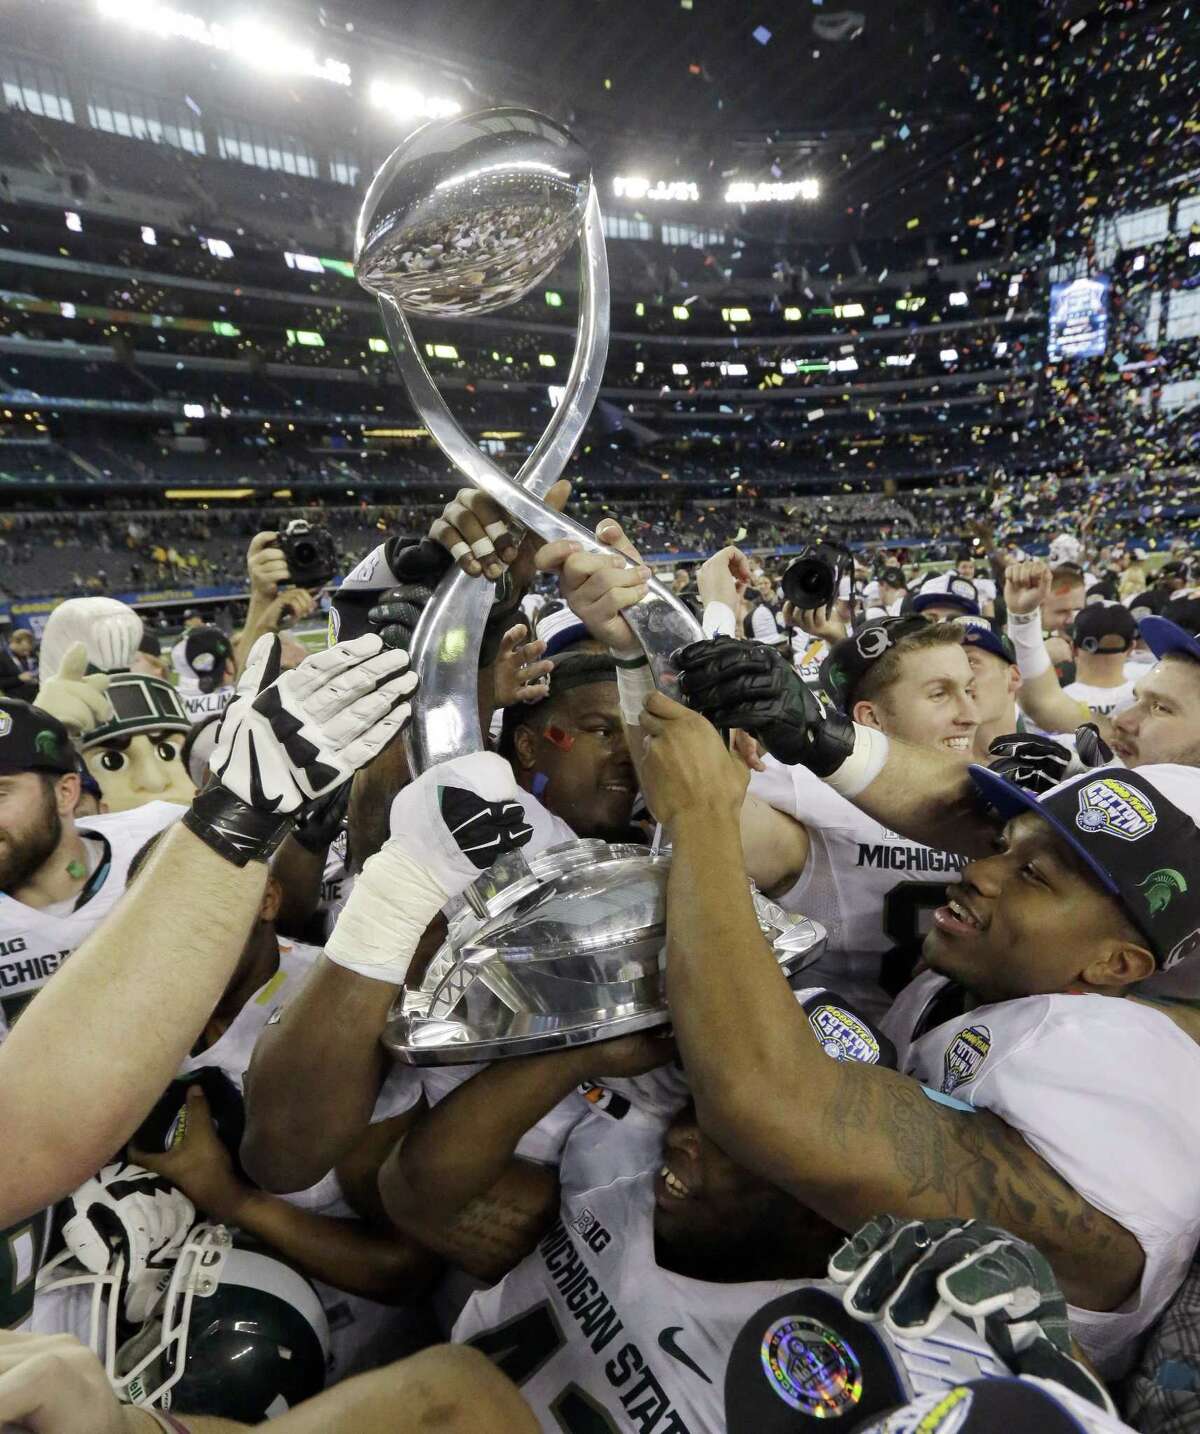 Michigan State players hoist the trophy after they beat Baylor 42-41 in the Cotton Bowl on Thursday in Arlington, Texas.